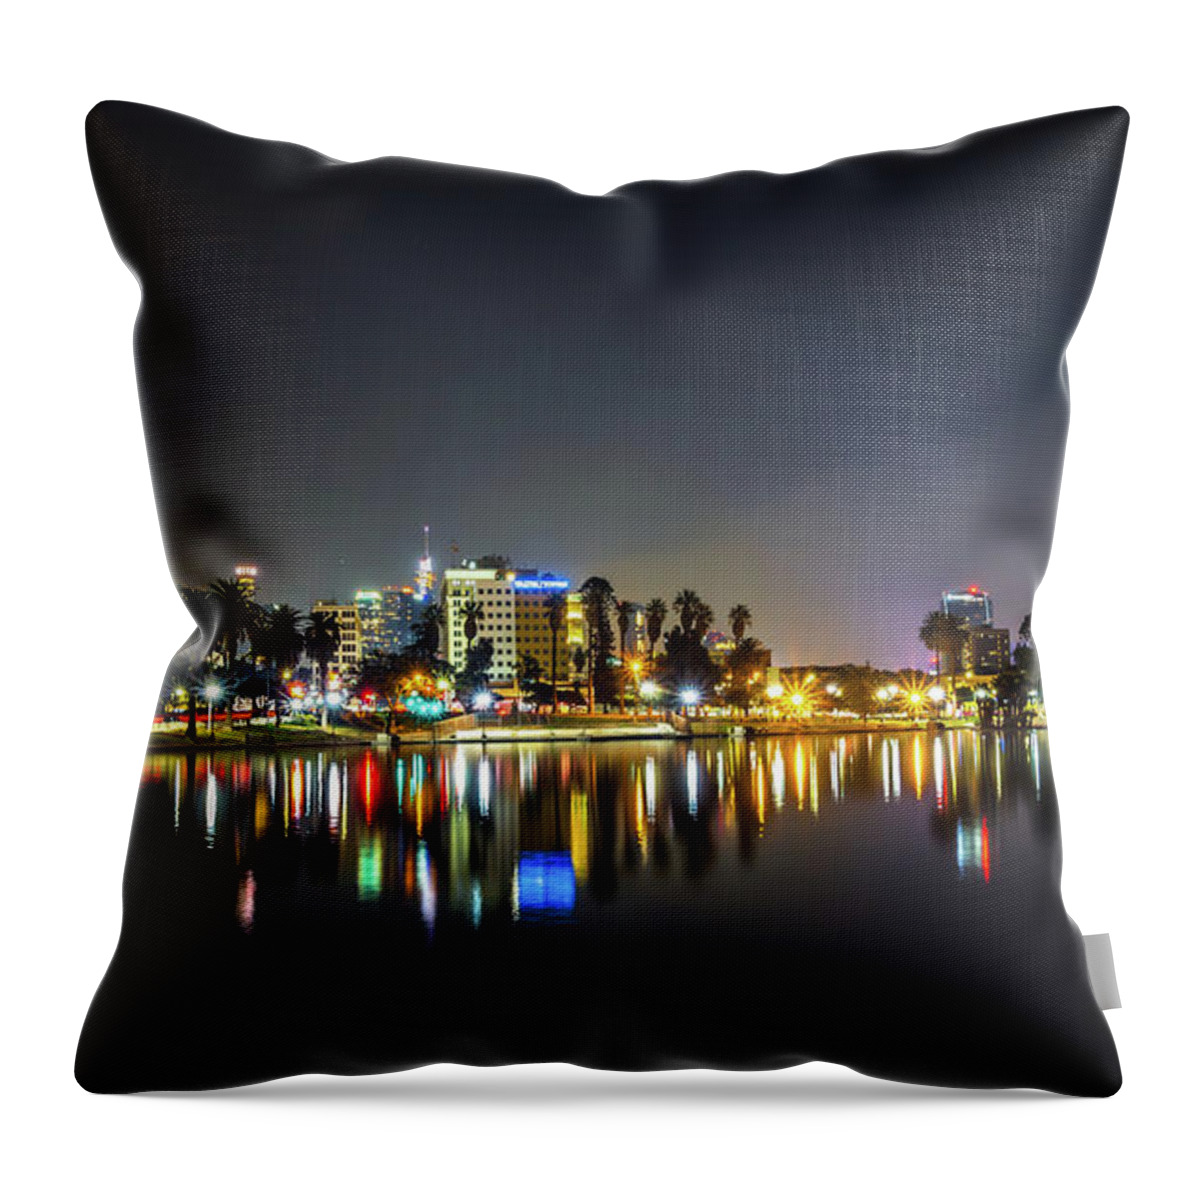 Downtown Throw Pillow featuring the photograph Downtown Los Angeles Skyline At Night #2 by Alex Grichenko